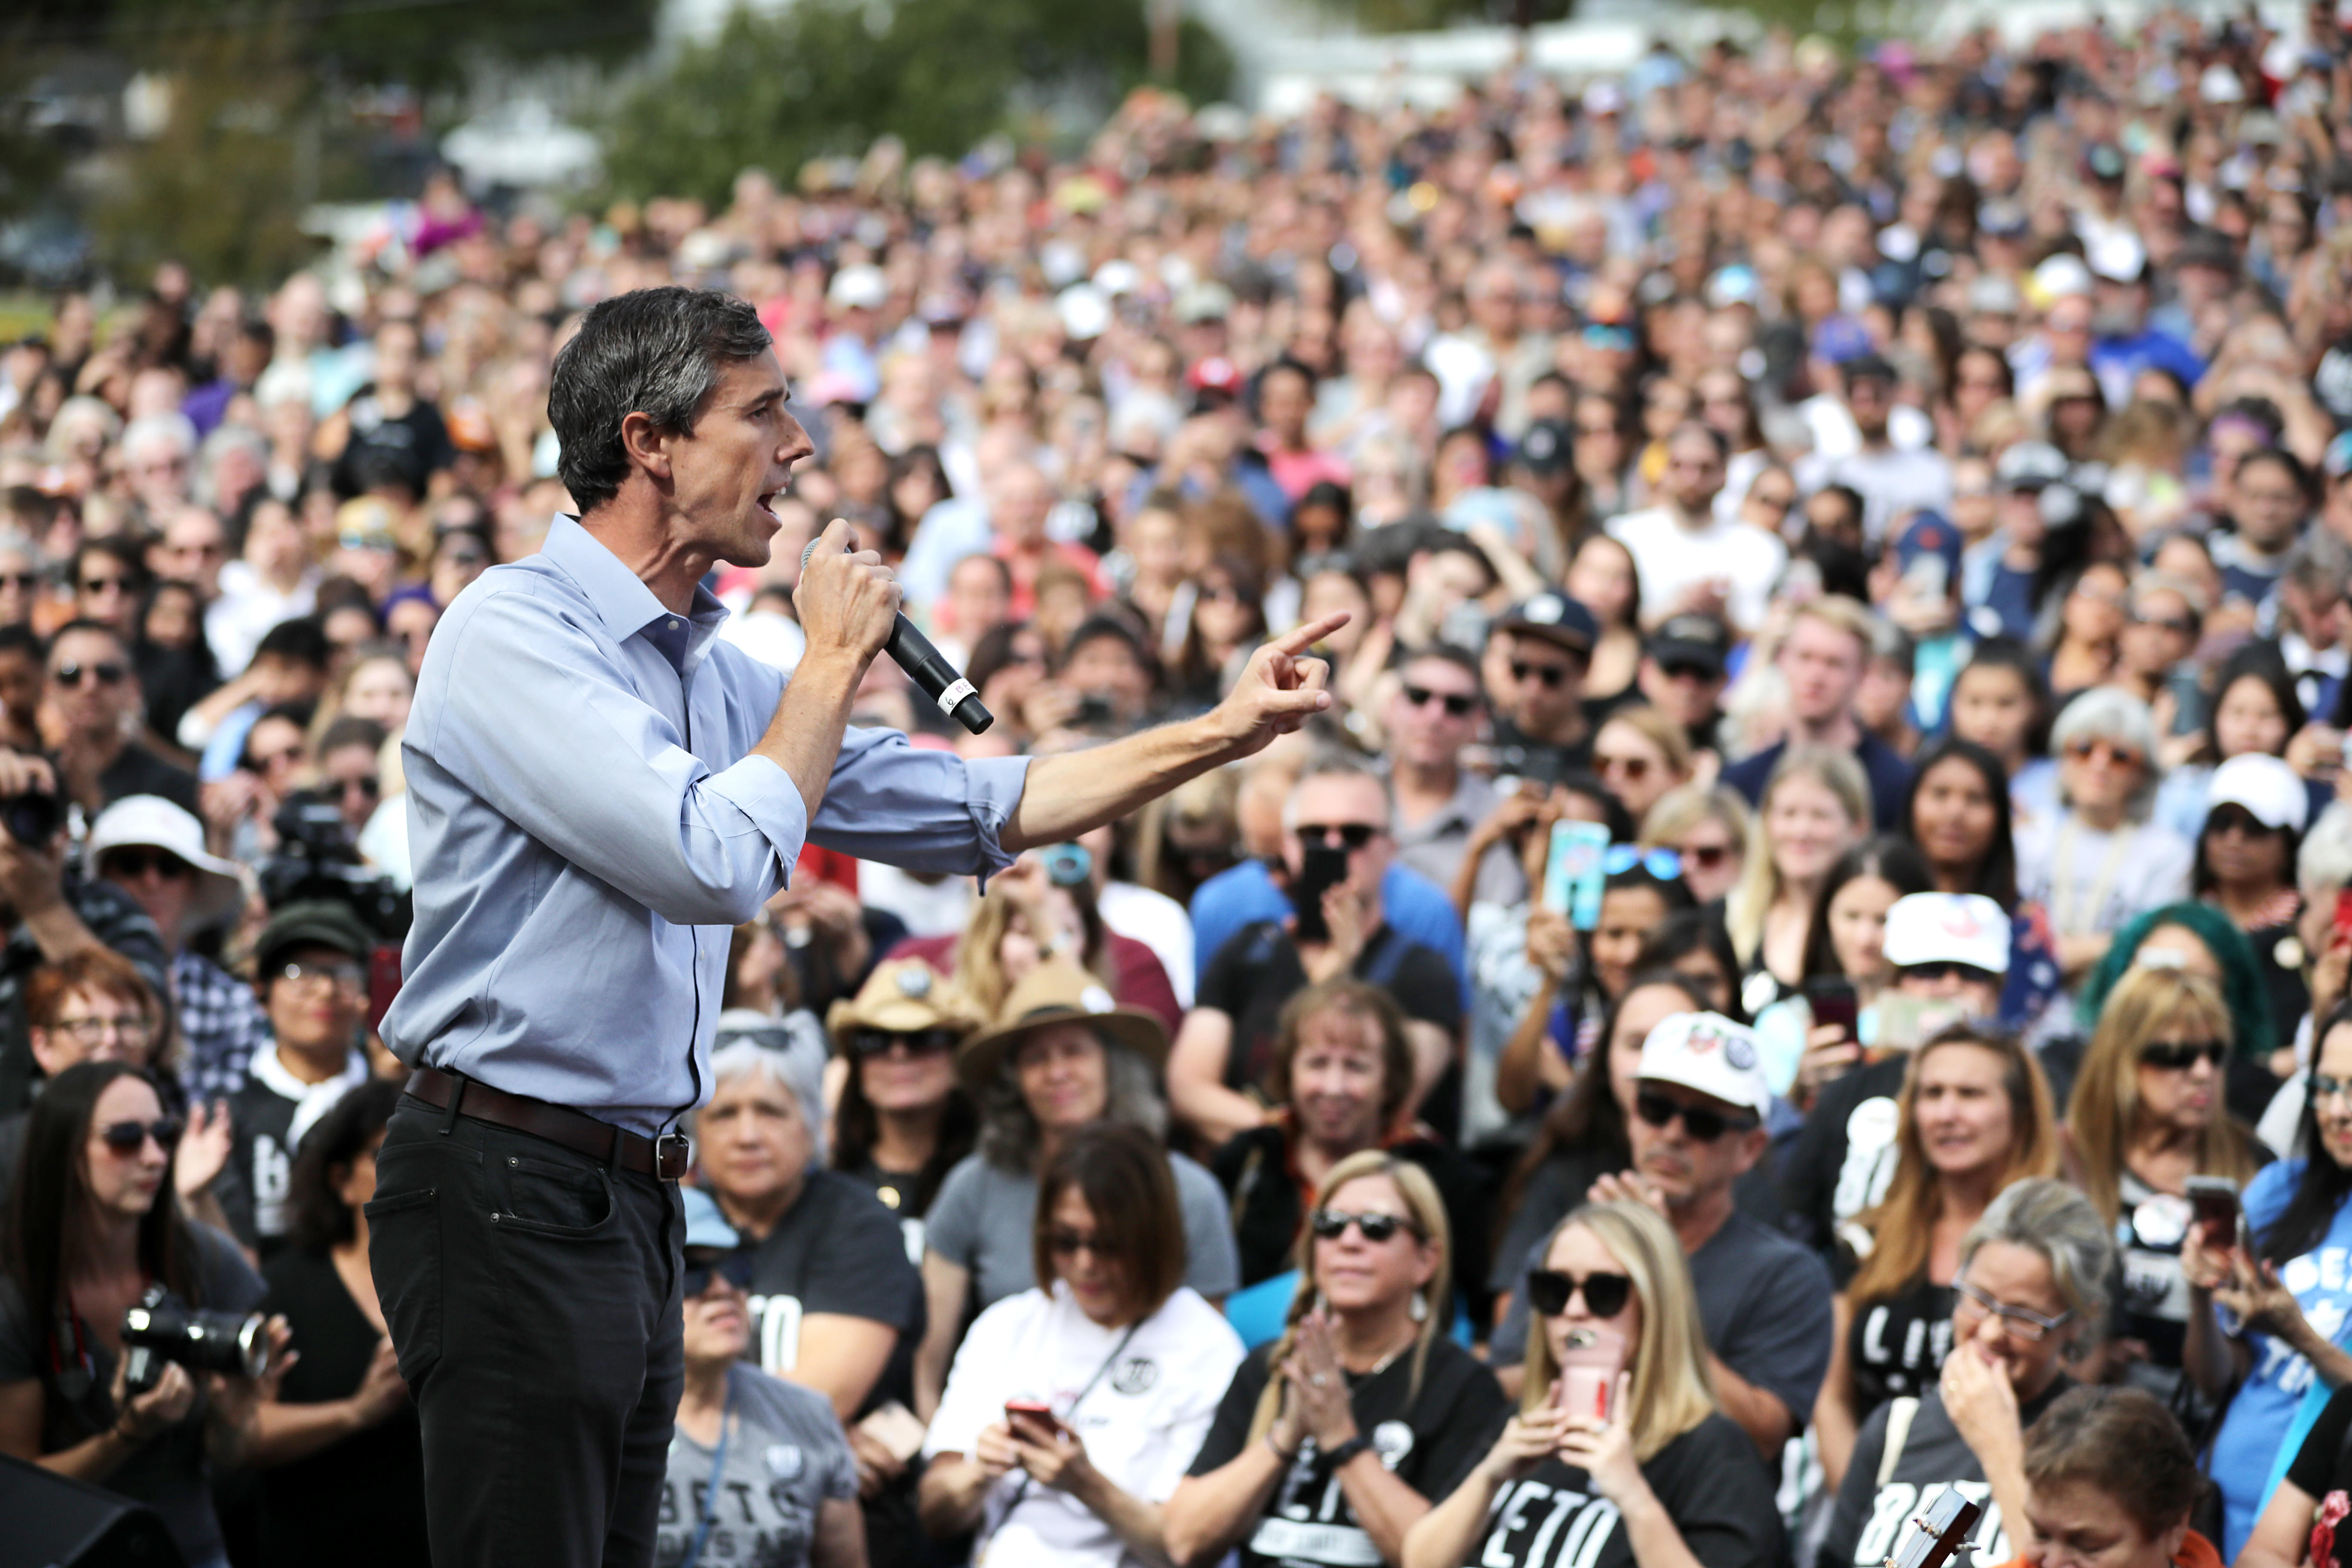 U.S. Senate candidate Rep. Beto O'Rourke (D-TX) addresses a campaign rally at the Pan American Neighborhood Park November 04, 2018 in Austin, Texas. (Chip Somodevilla/Getty Images)